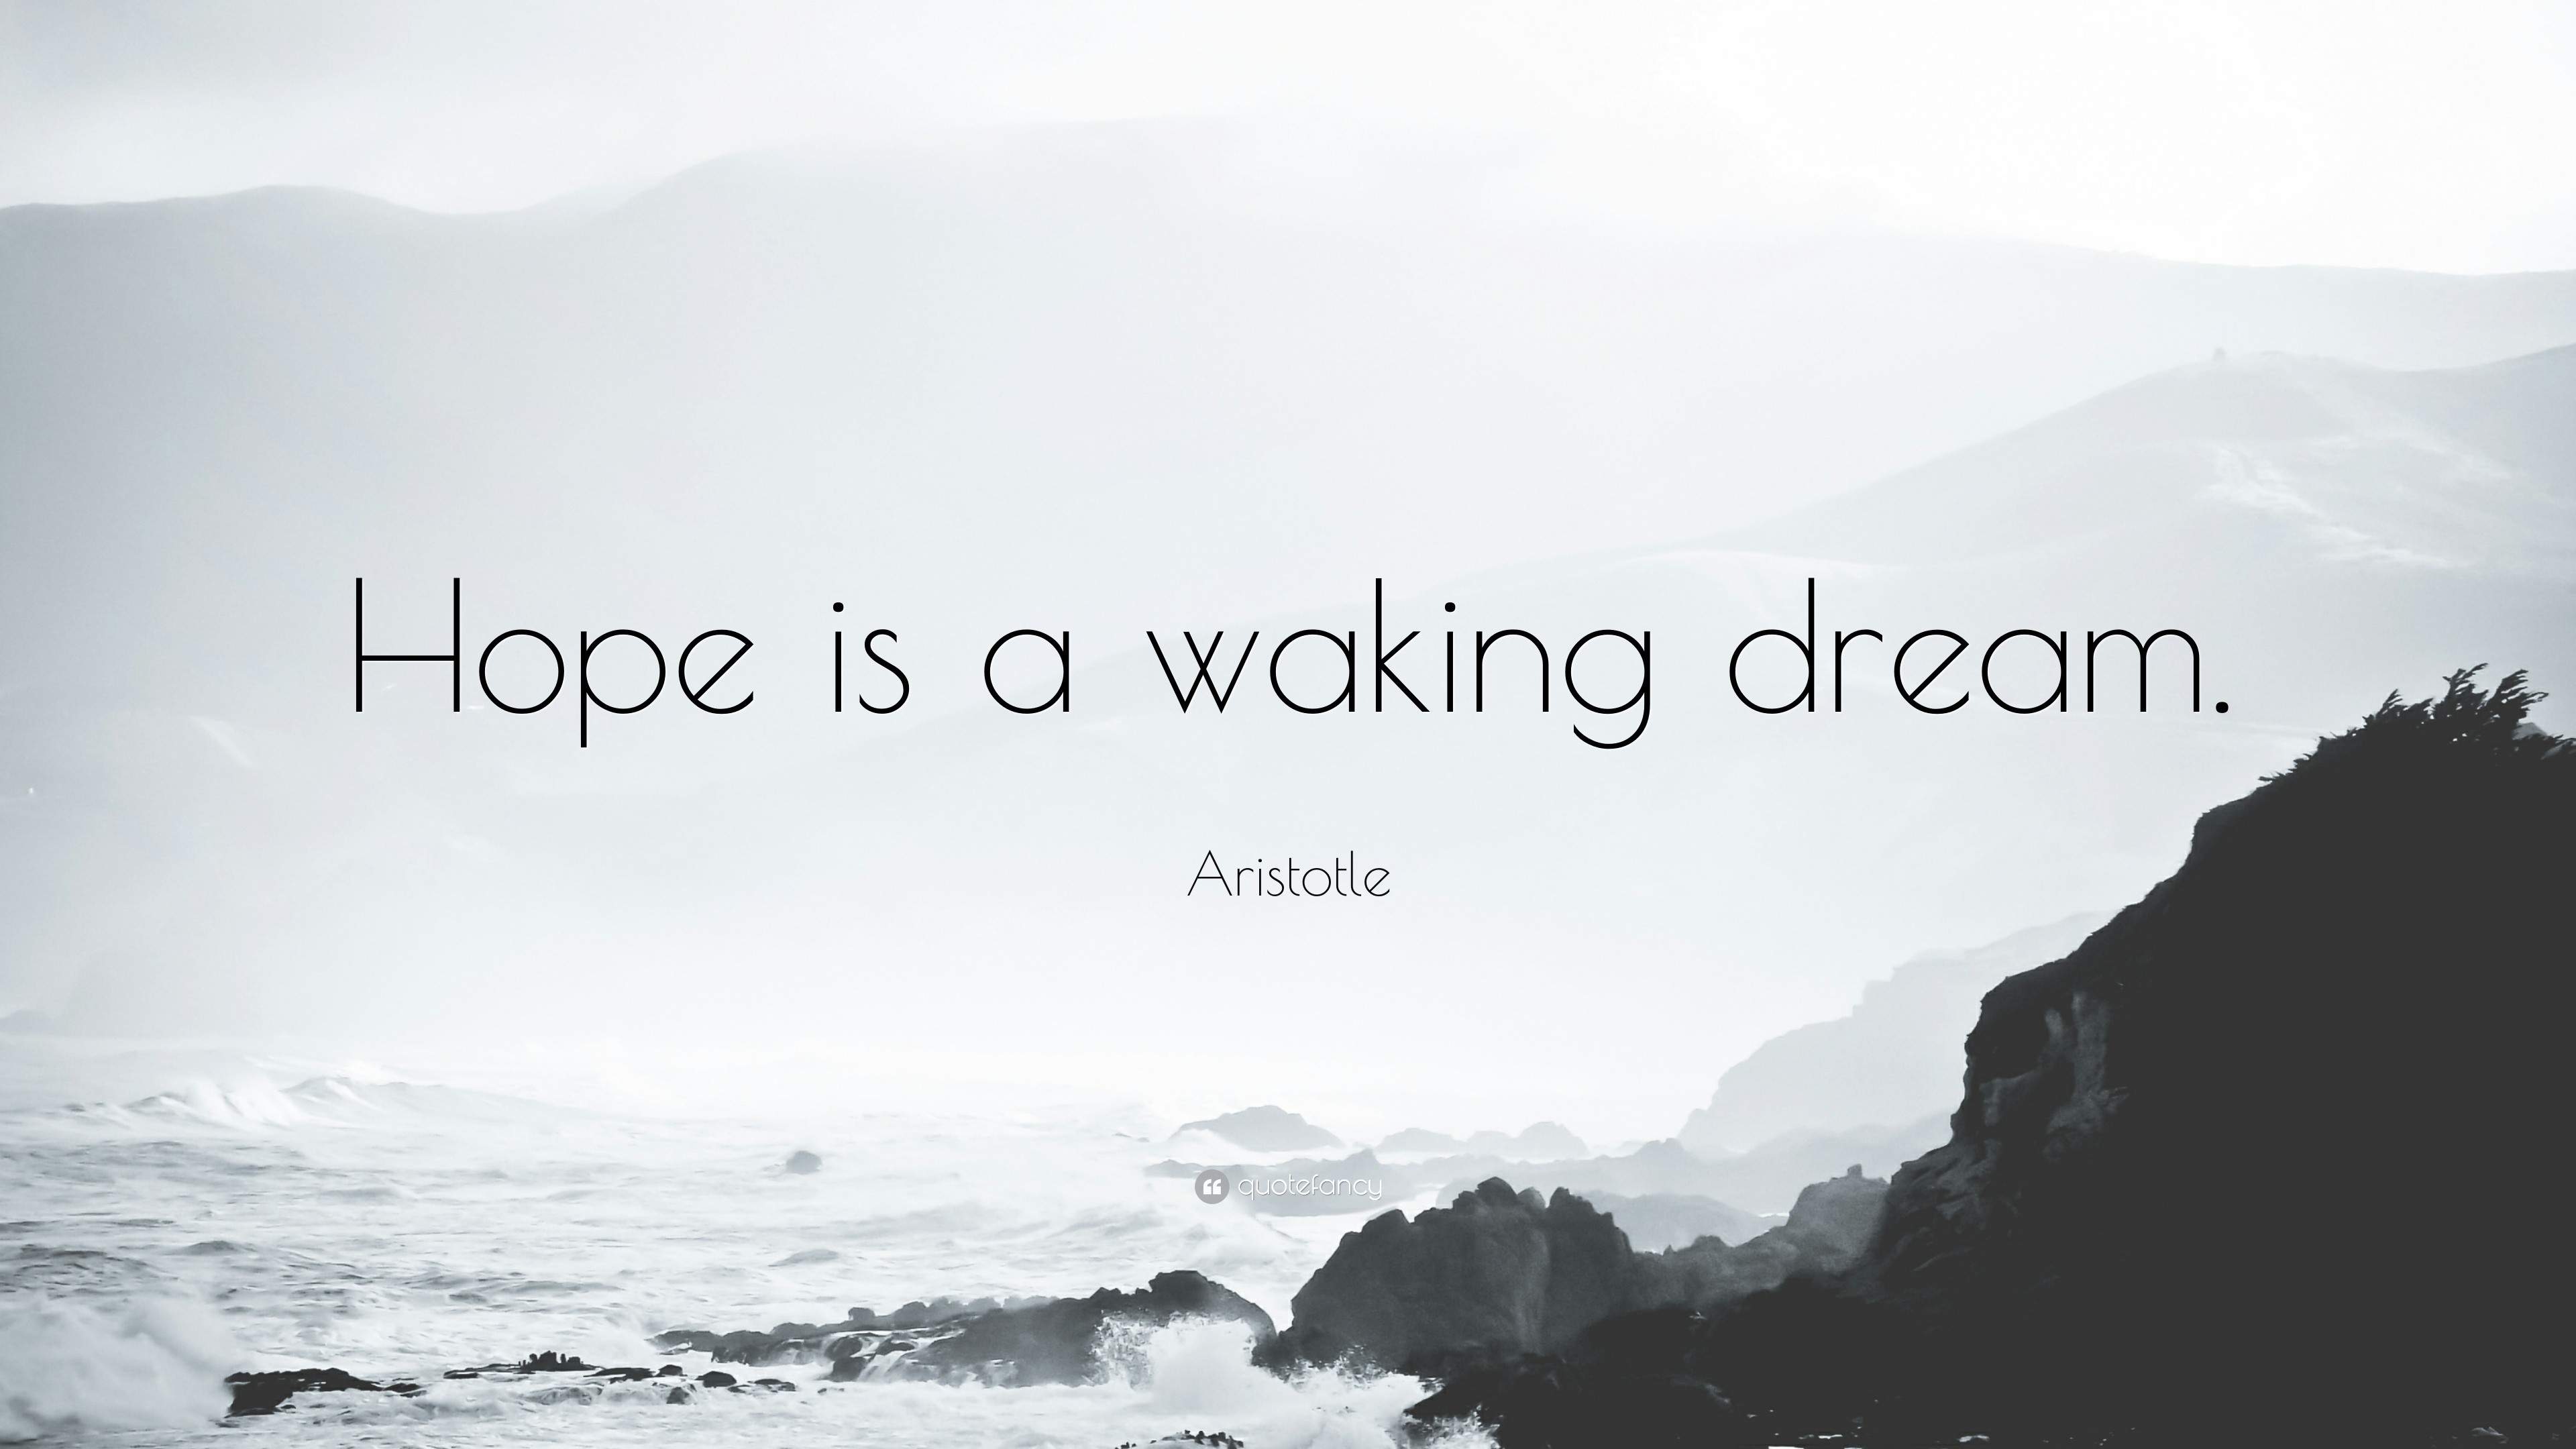 3840x2160 Best Motivational Wallpapers with Inspiring Quotes